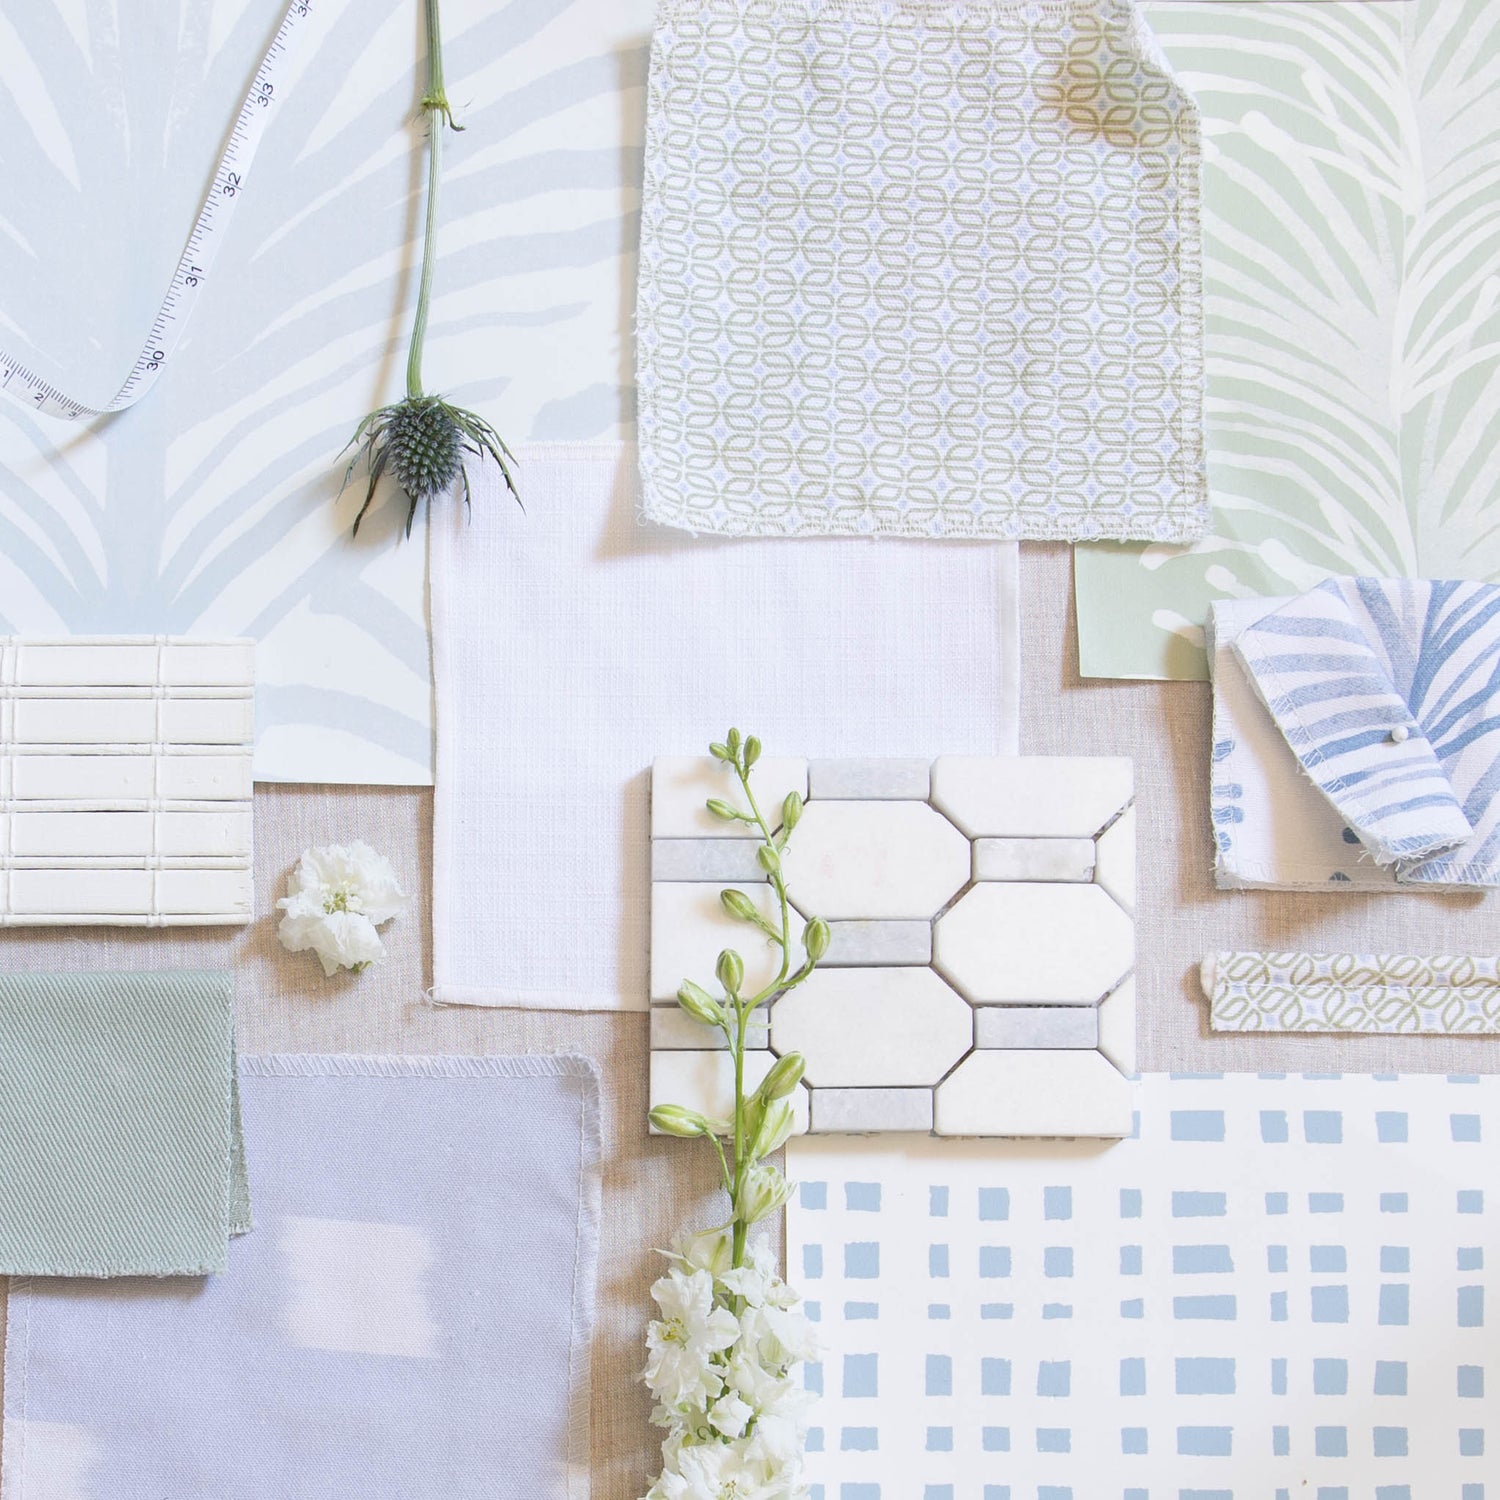 Interior design moodboard and fabric inspirations with Sky Blue Pattern Printed swatch, White Cotton Swatch, Moss Green Geometric Printed Swatch, and sky blue gingham printed swatch.